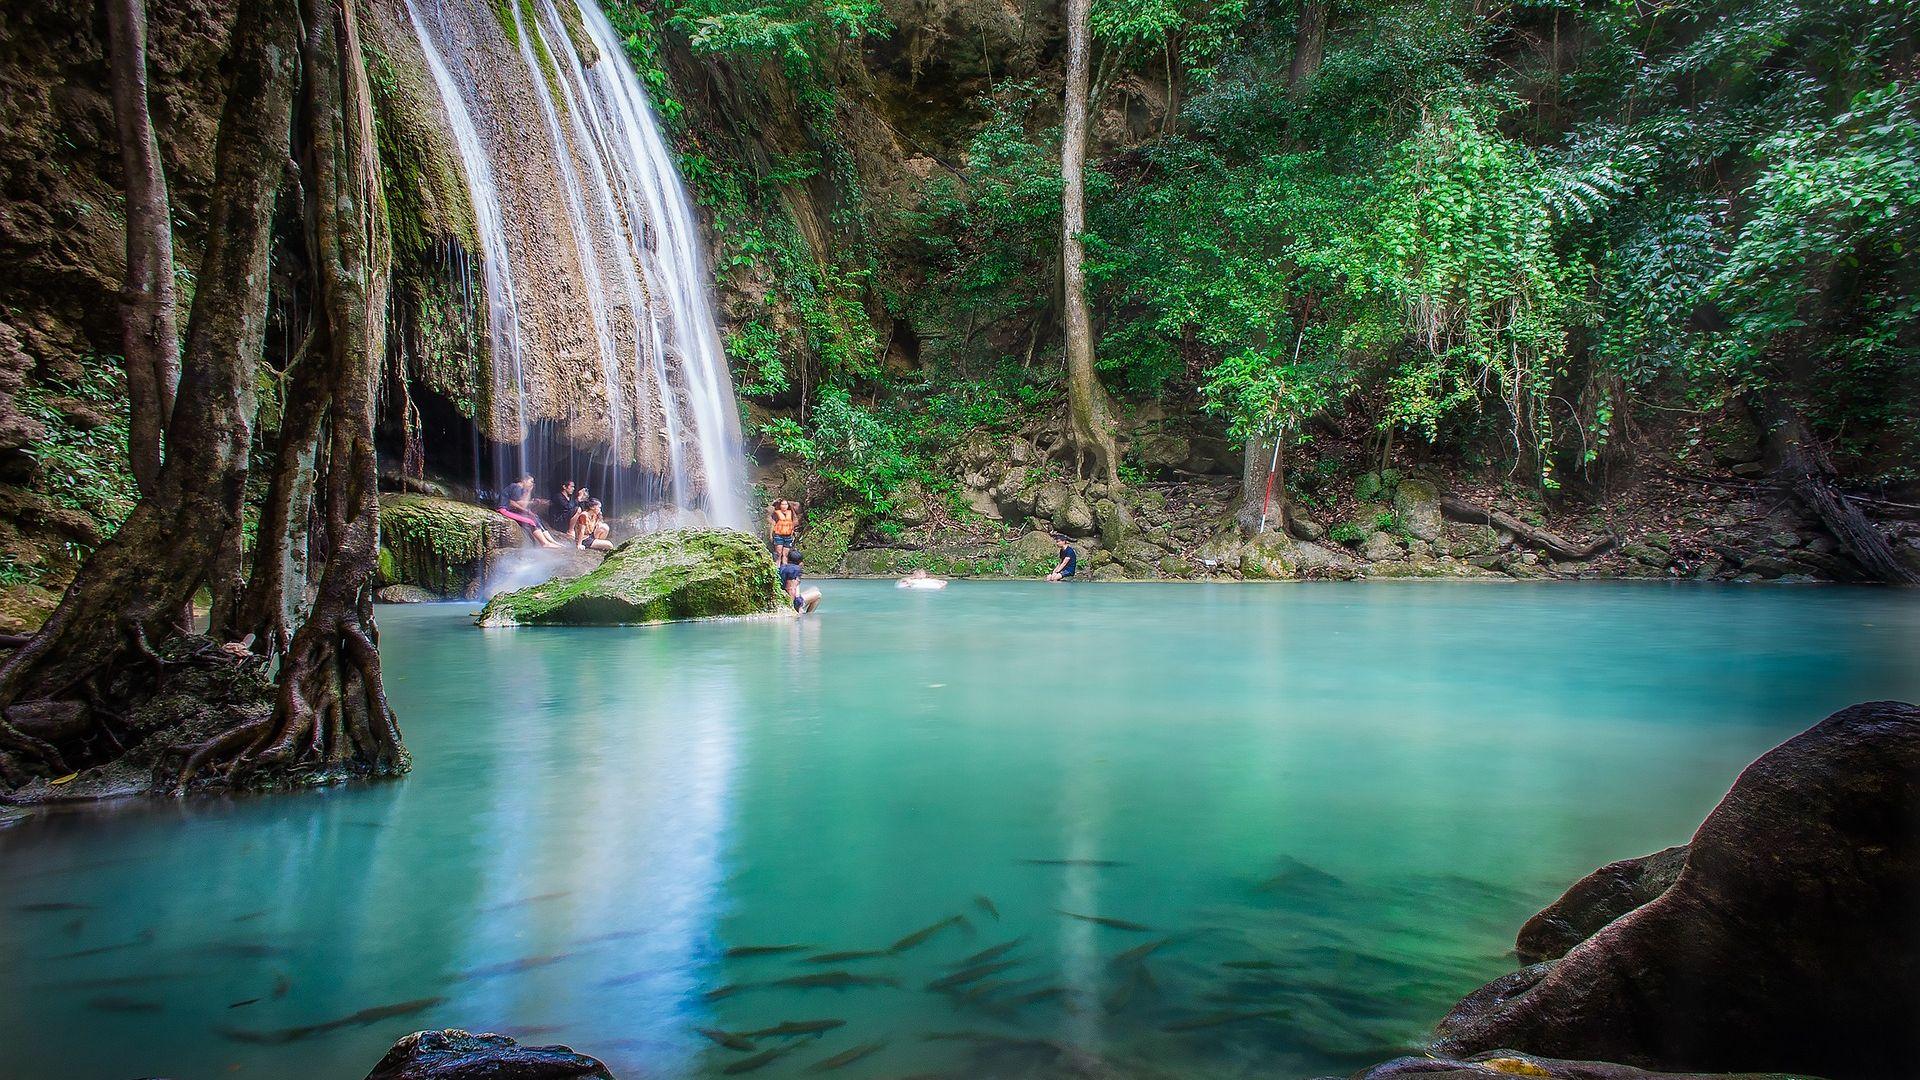 Summer Water Play by People in Erawan National Park Thailand